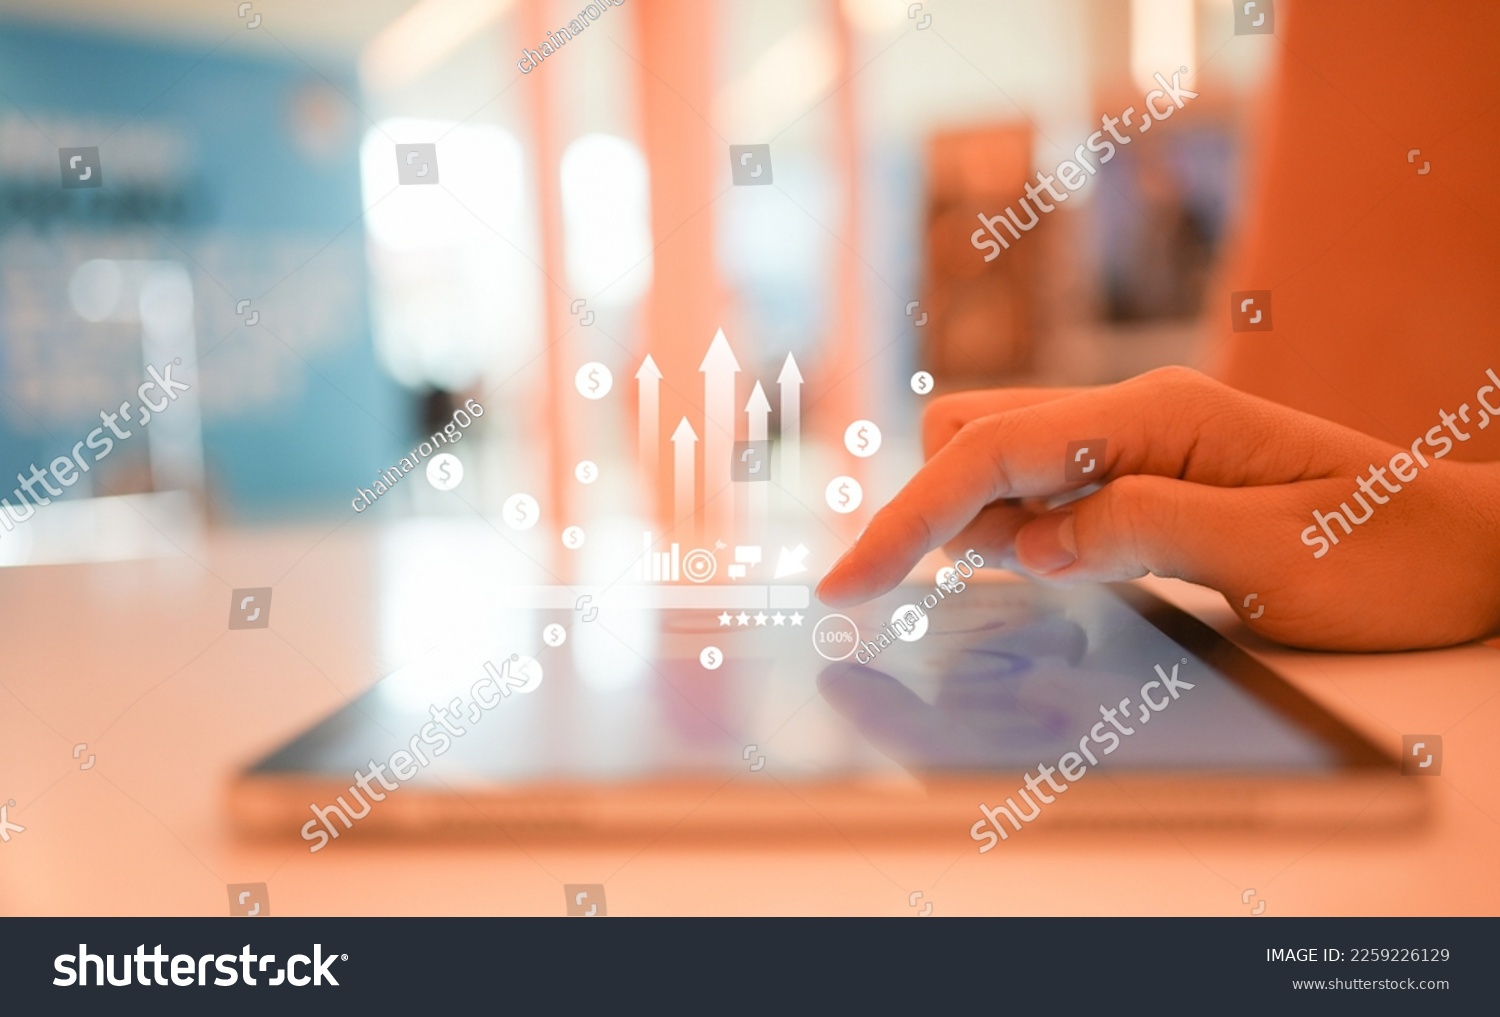 close up businessman hand touch screen on digital tablet to use marketing tool and check traffic research of pay per click program on web page for online b2b business and lifestyle concept #2259226129